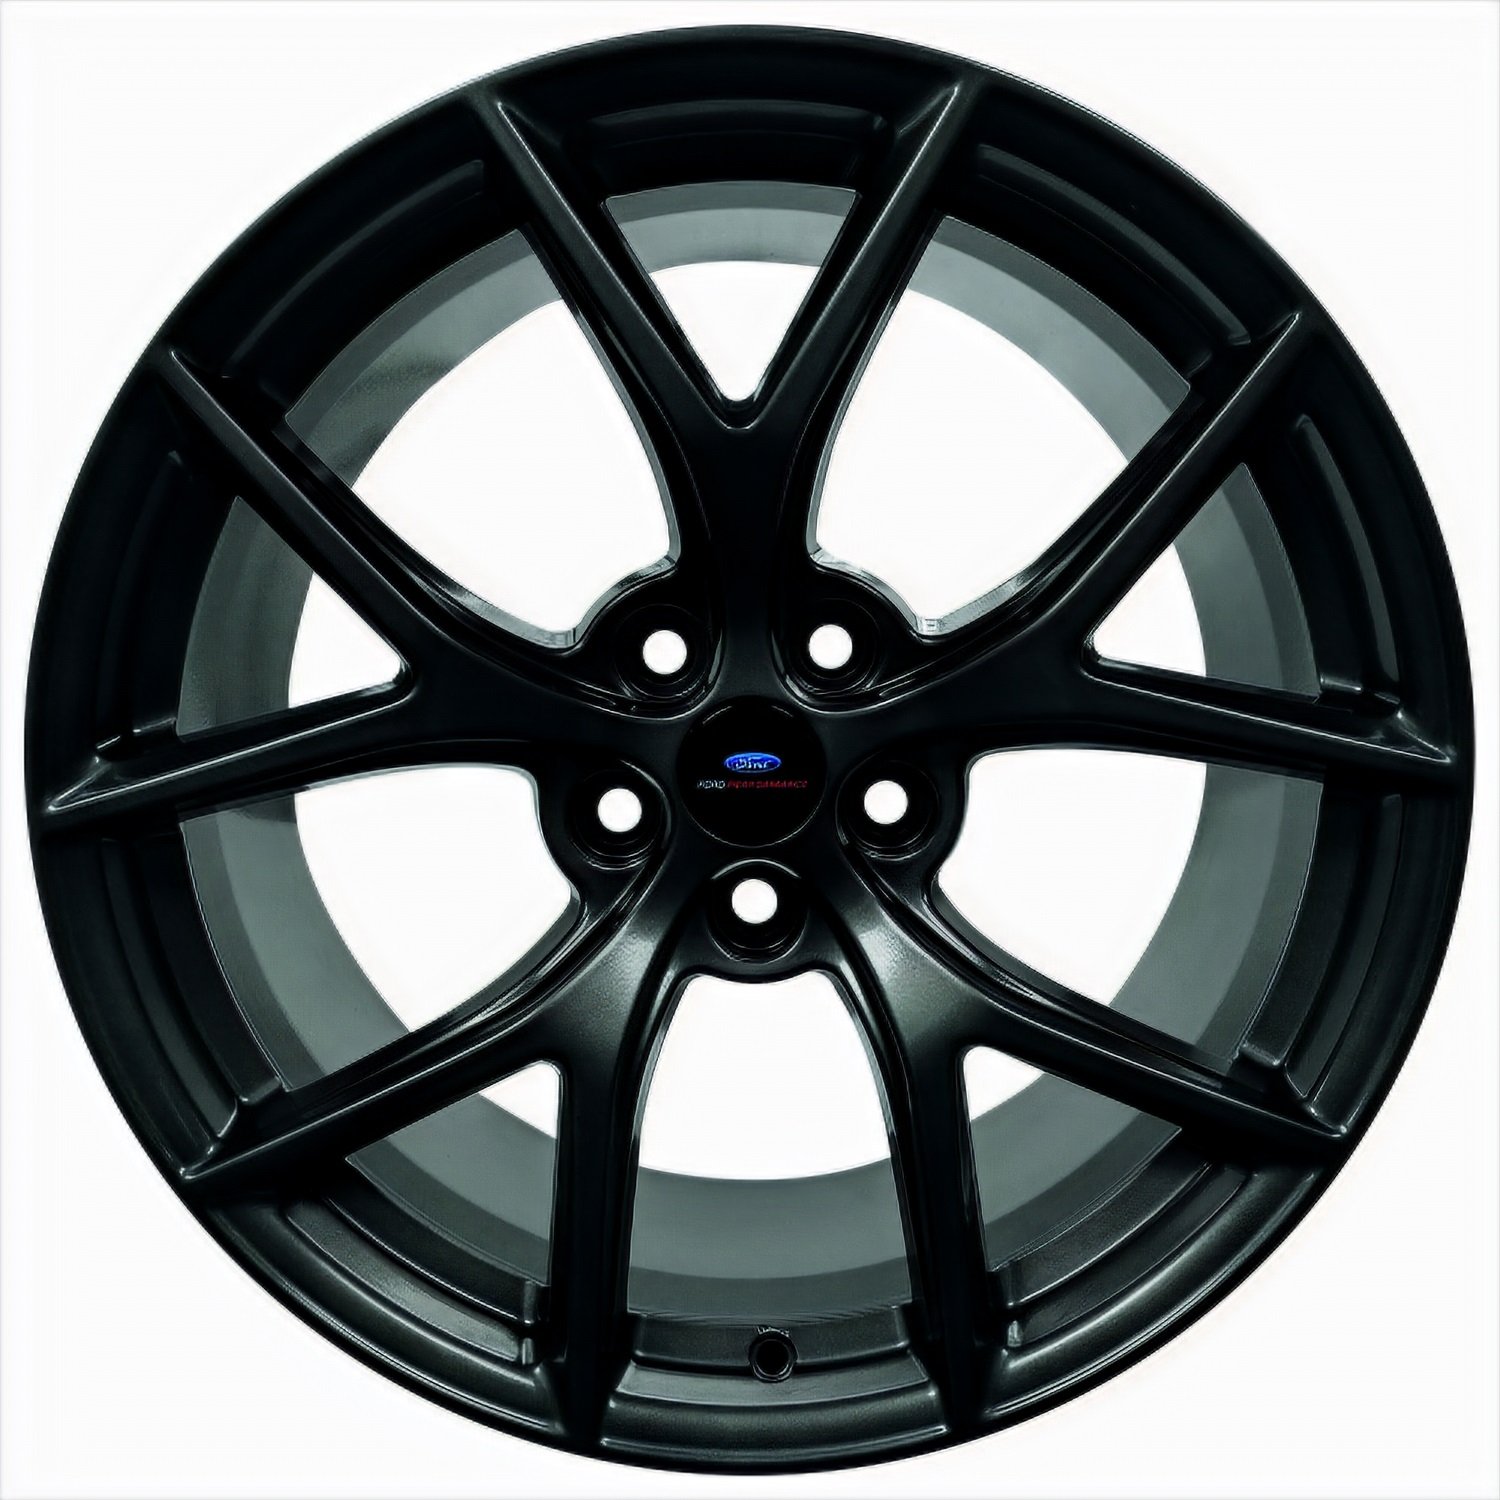 M-1007-DC1995MB HP Performance Pack Front Wheel Fits 6th Gen Ford Mustang Models [19" x 9.5"] Matte Black